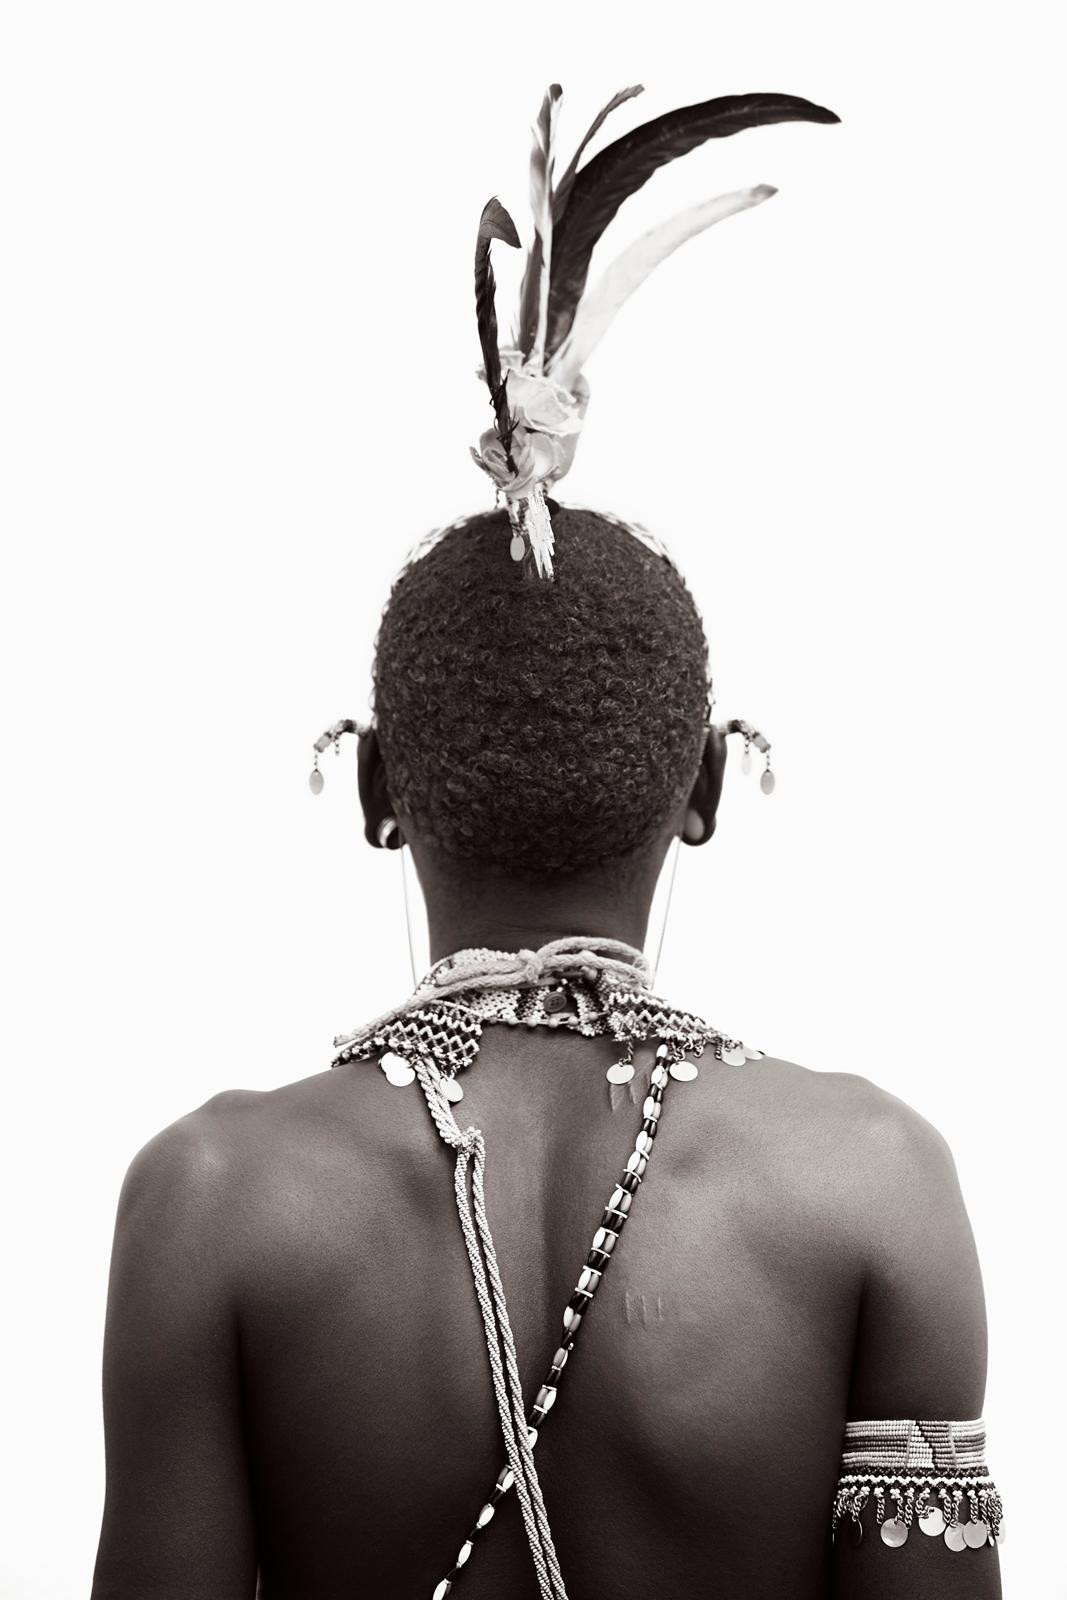 Drew Doggett Black and White Photograph - Black and white portrait of the back of a young Rendille warrior wearing traditi